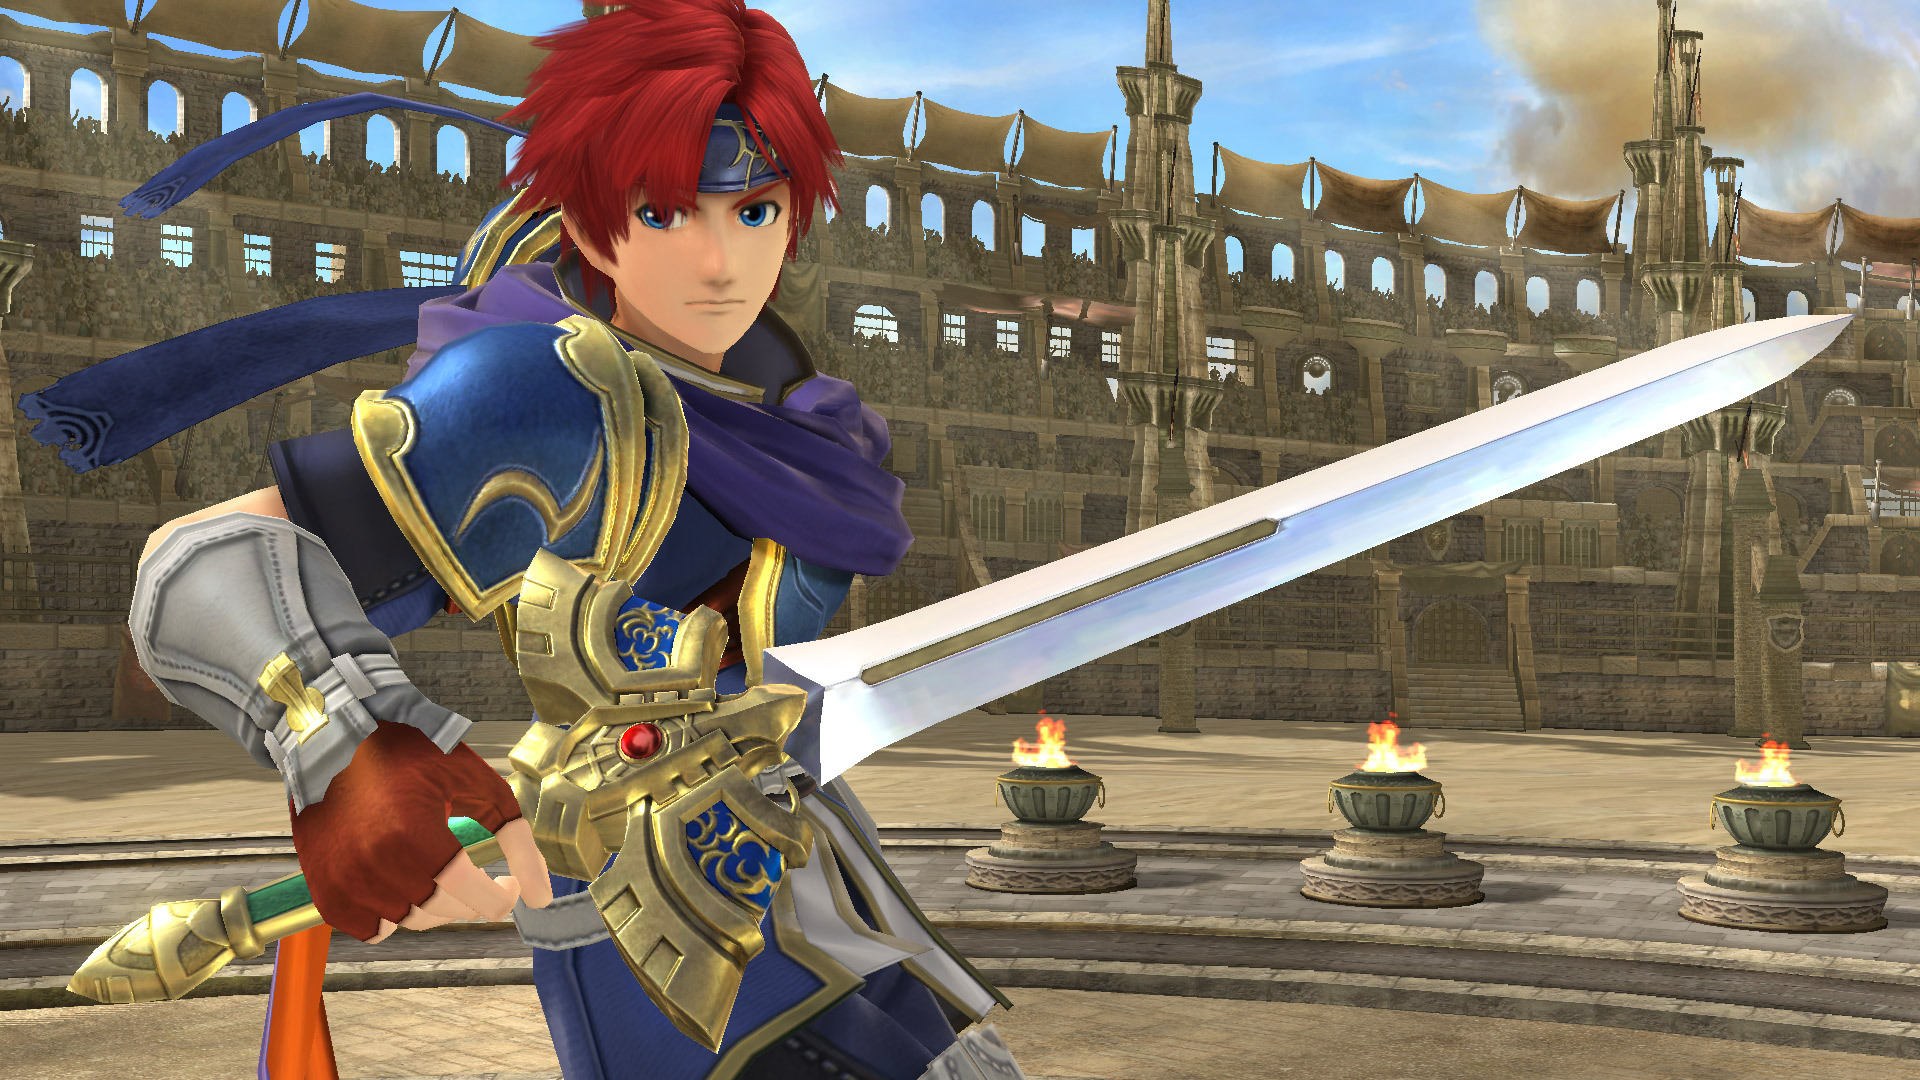 Roy is a low-tier character which will make it a tougher challenge for Star...